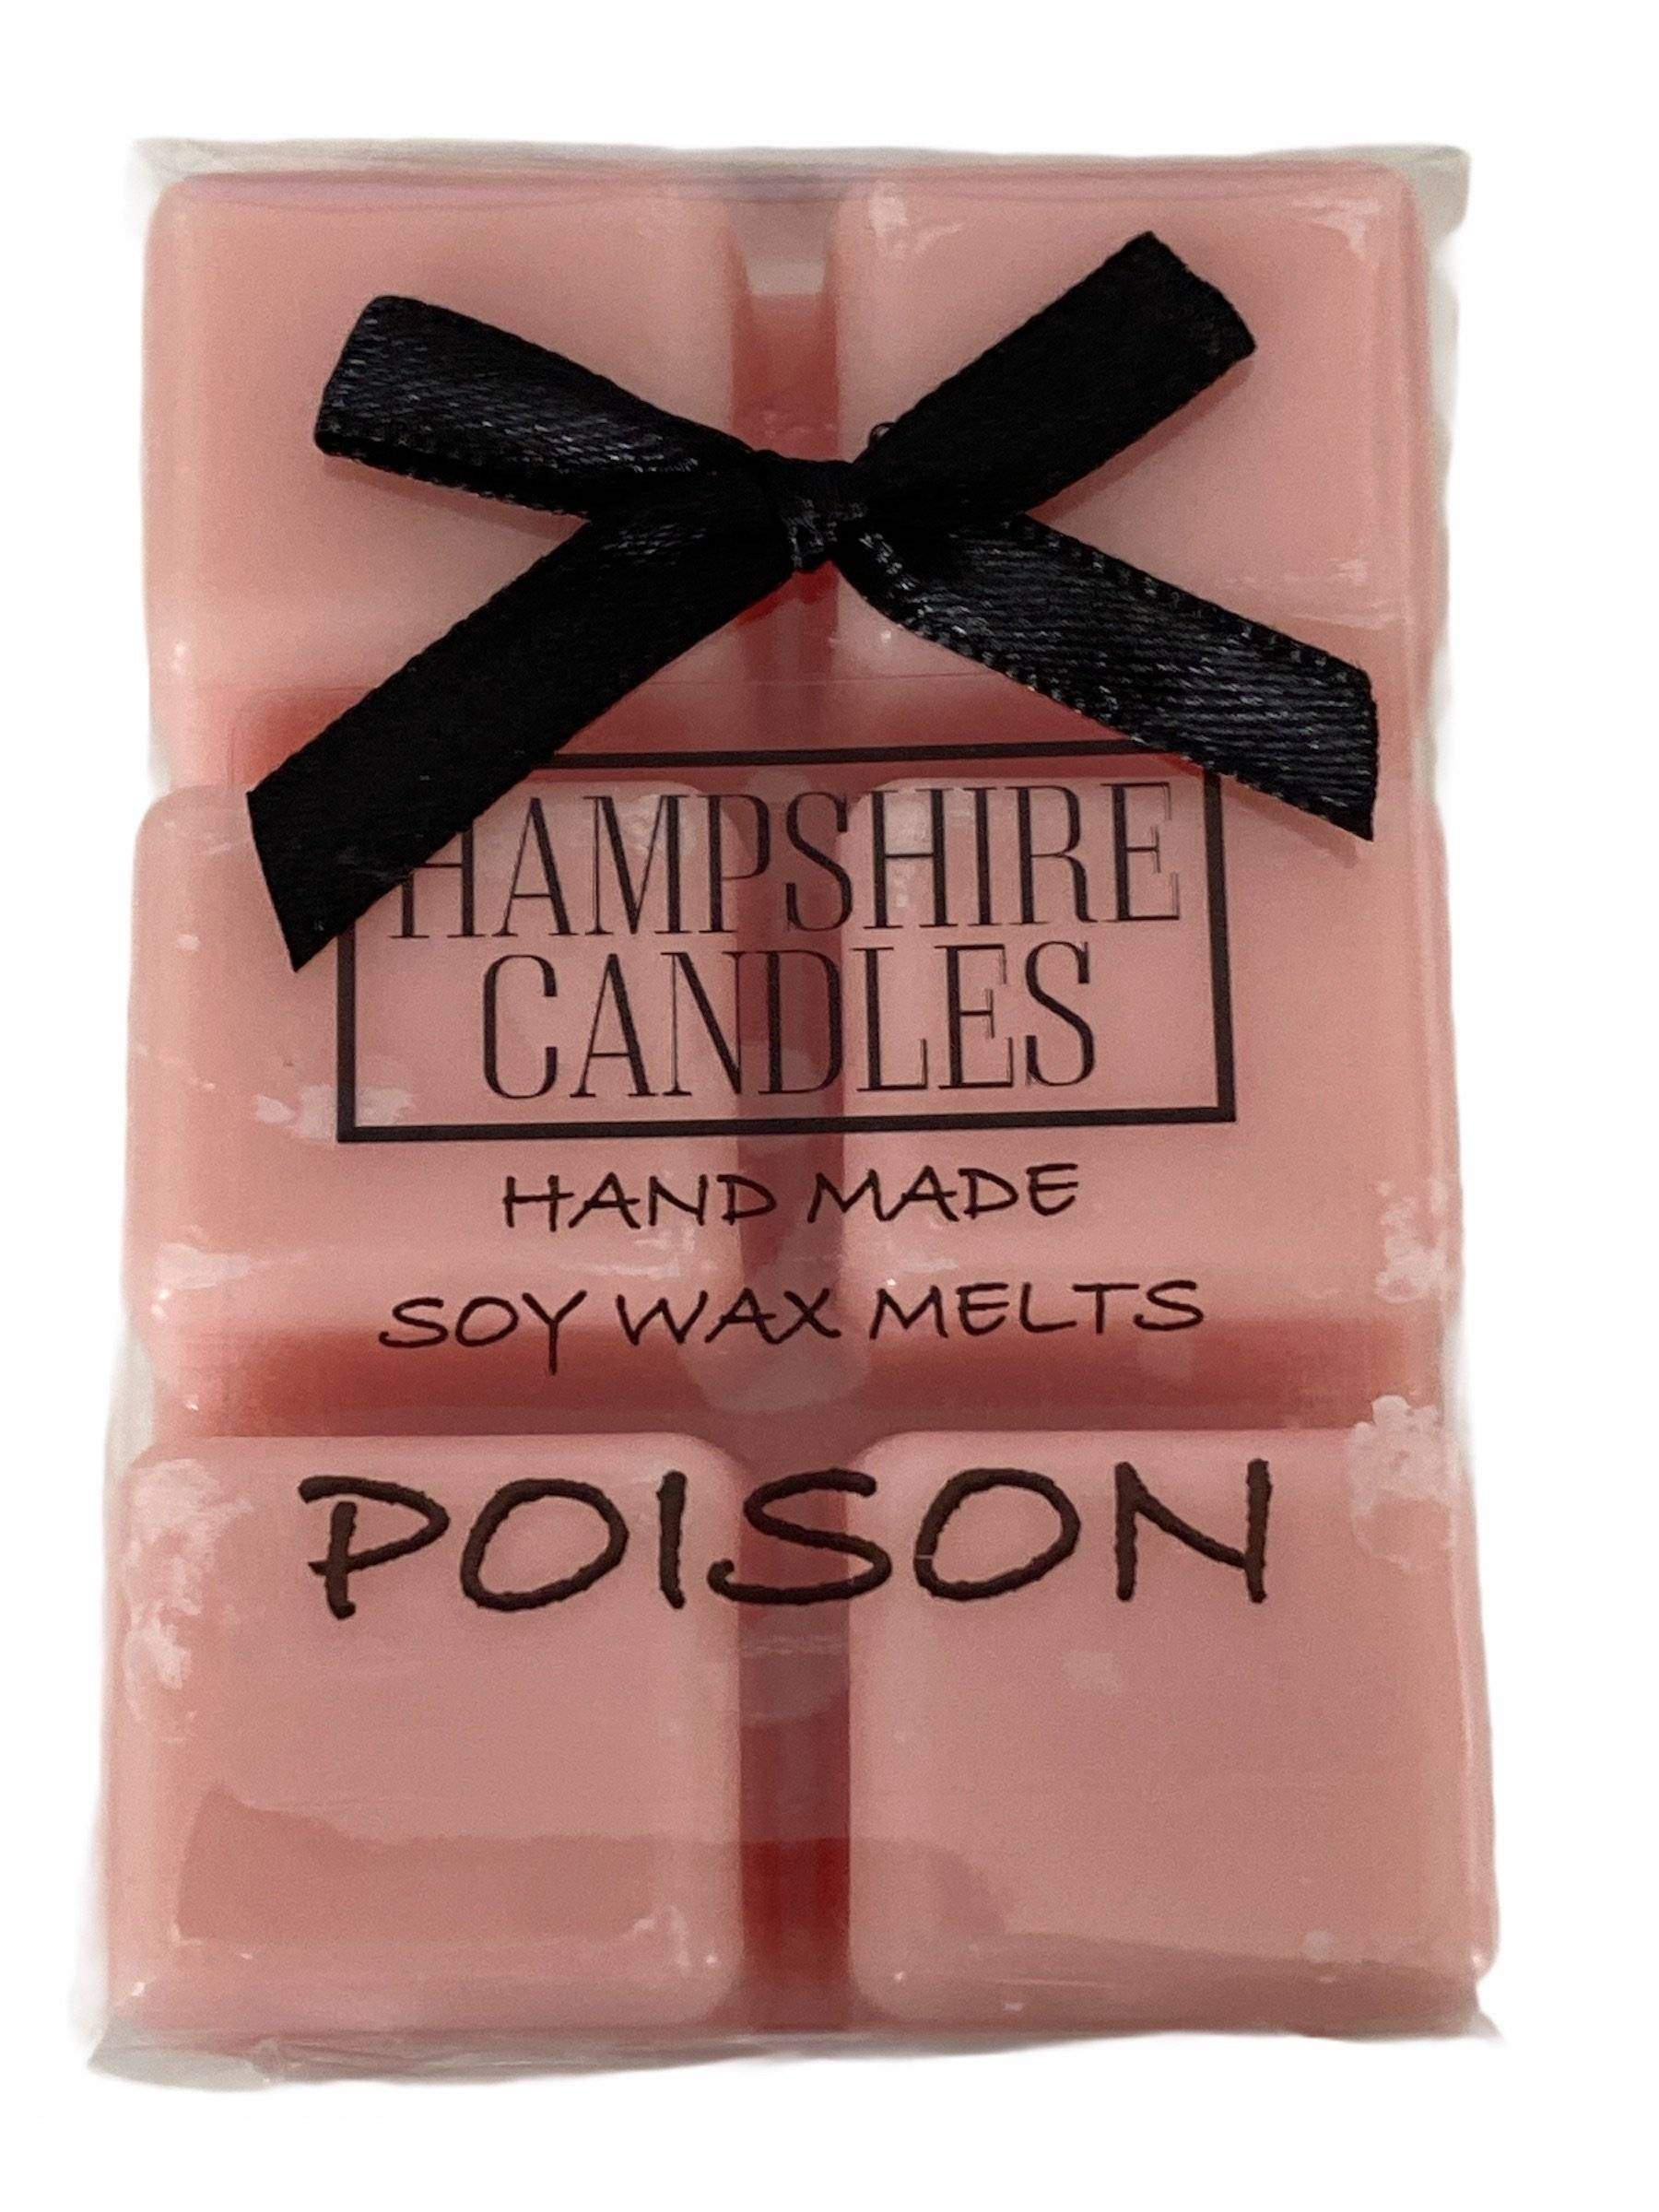 Poison Wax Melts-FREE Shipping over £30.00-